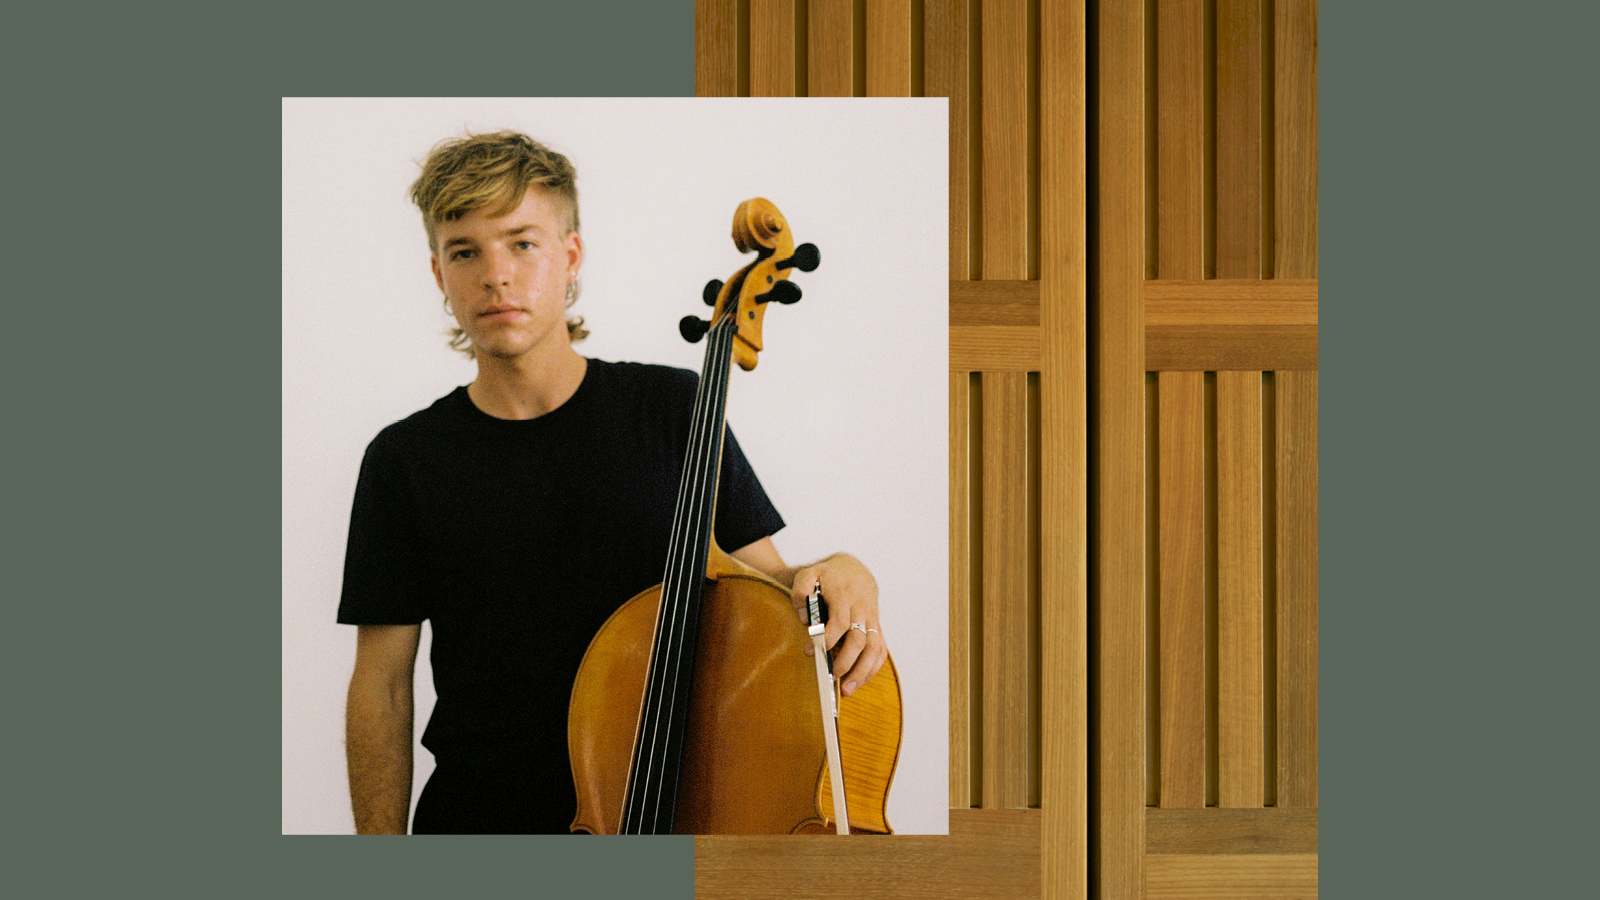 A young blonde man in black t-shirt holding a bass violin.